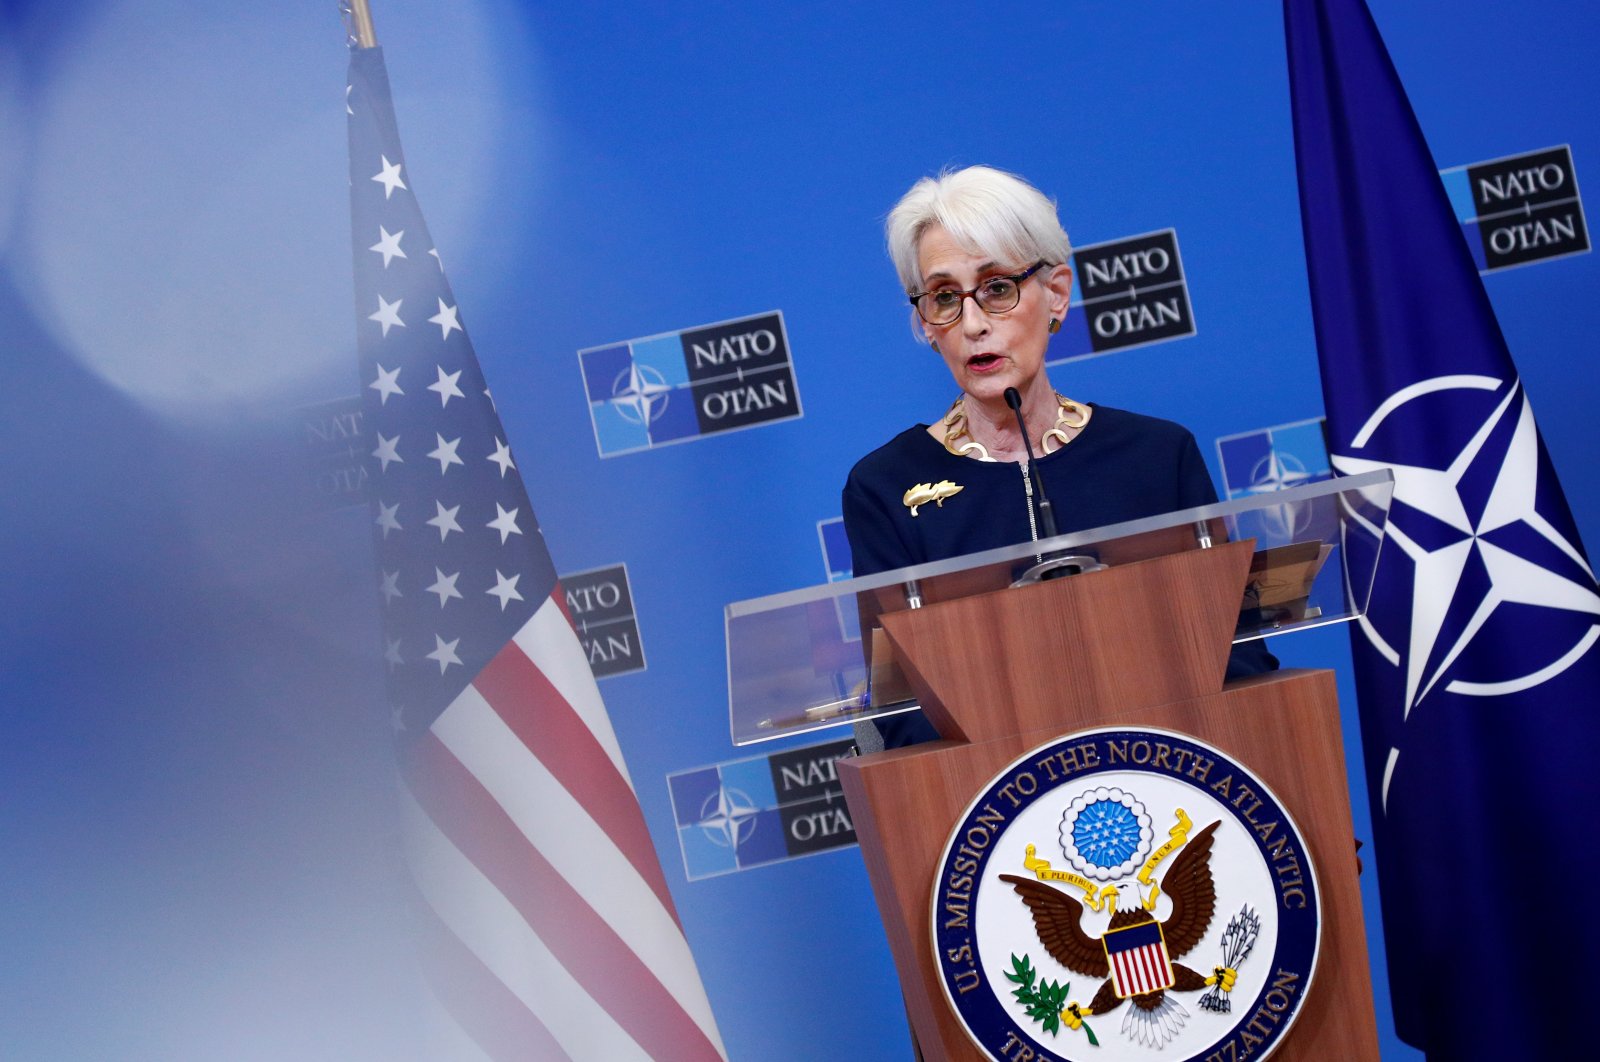 U.S. Deputy Secretary of State Wendy Sherman holds a news conference at the NATO headquarters in Brussels, Belgium January 12, 2022. (Reuters Photo)